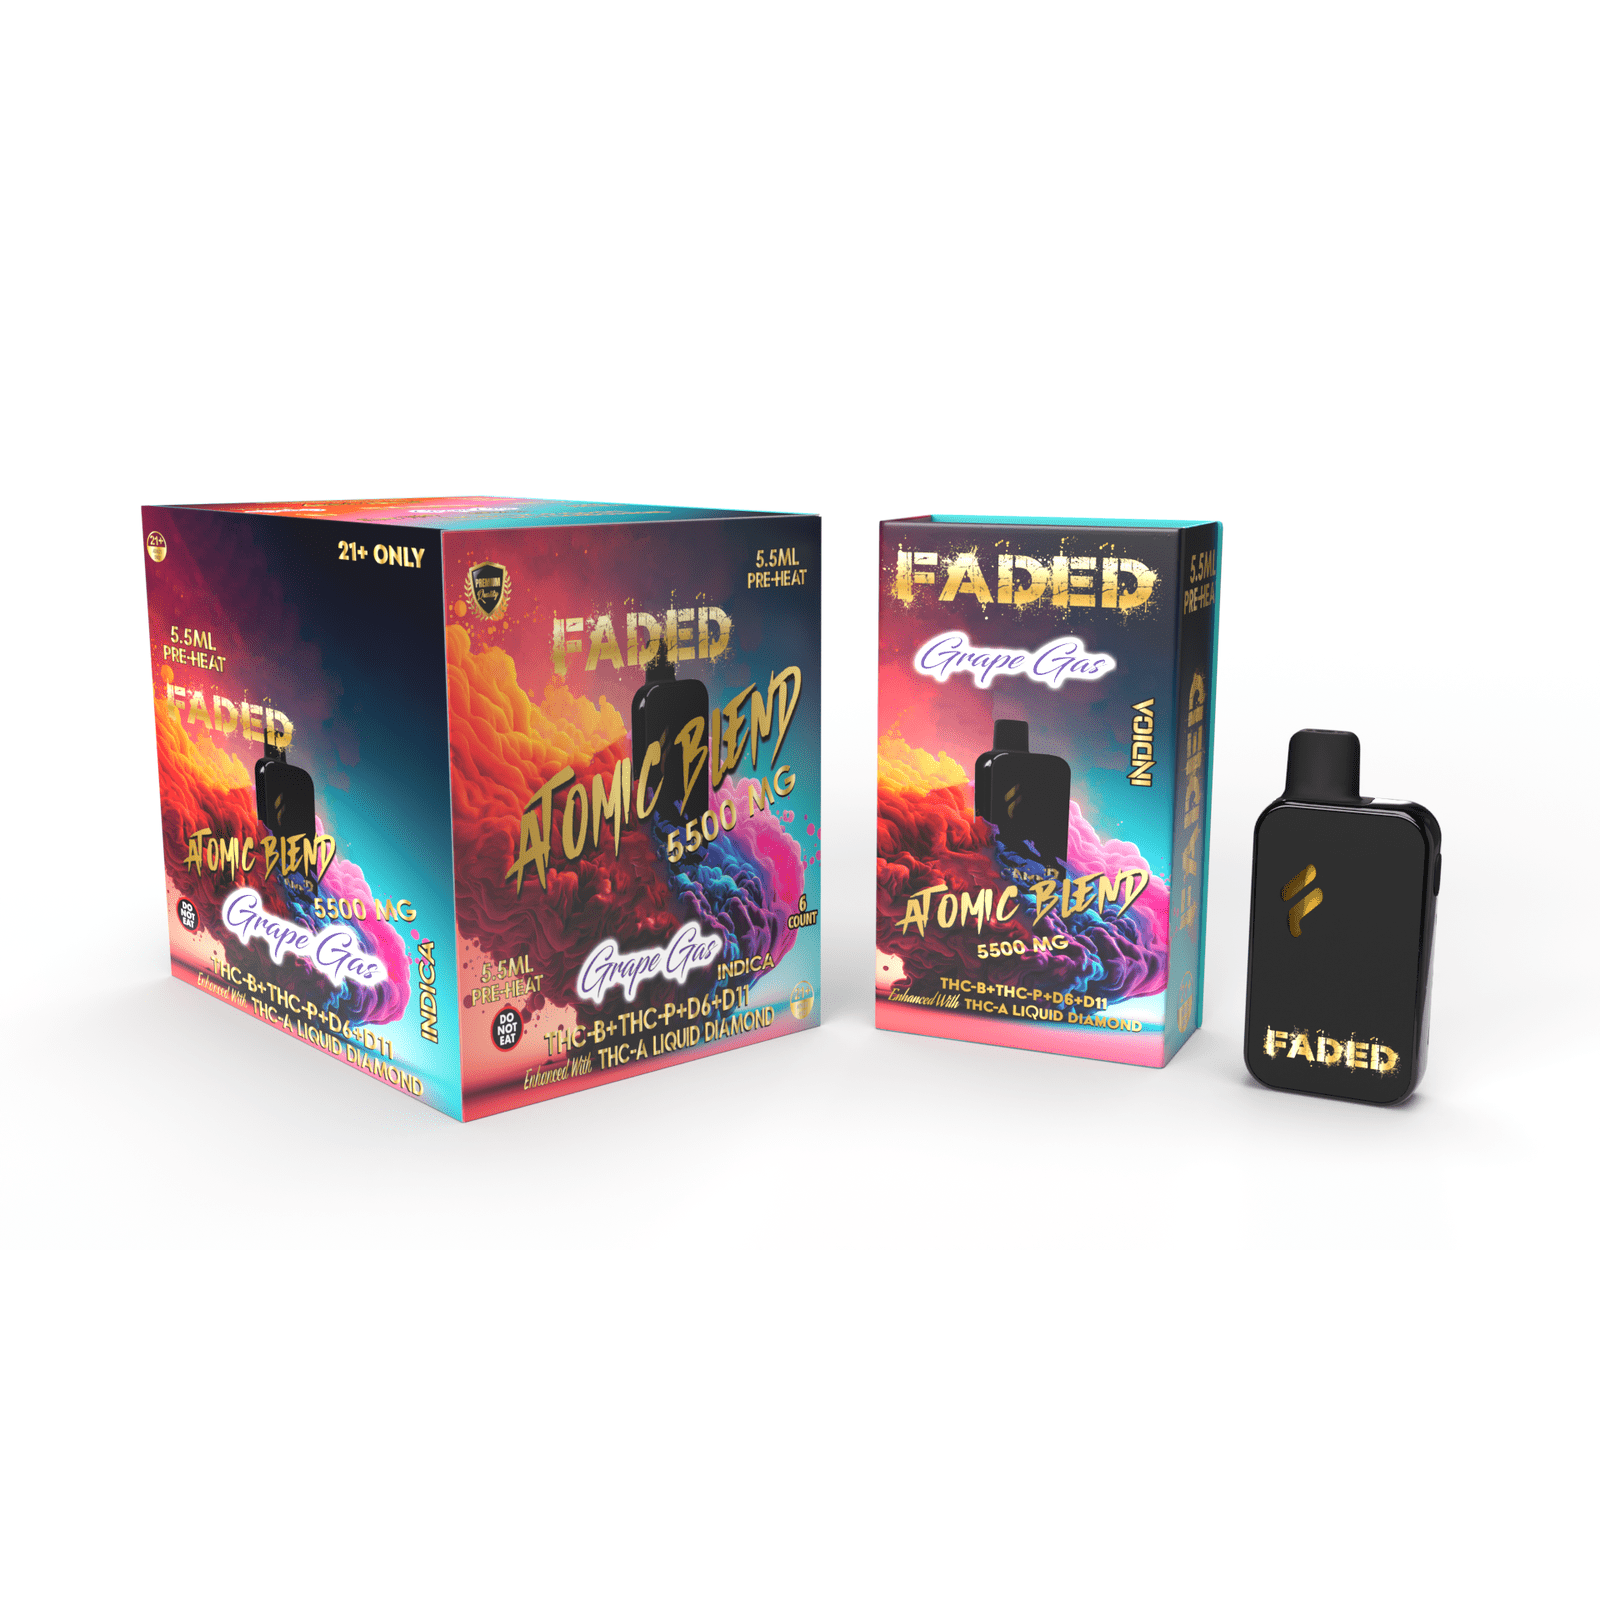 FADED THC-B+THC-P+D6+D11 ENHANCED WITH THC-A LIQUID DIAMOND RECHARGEABLE DISPOSABLE - INDICA GRAPE GAS 5.5ML